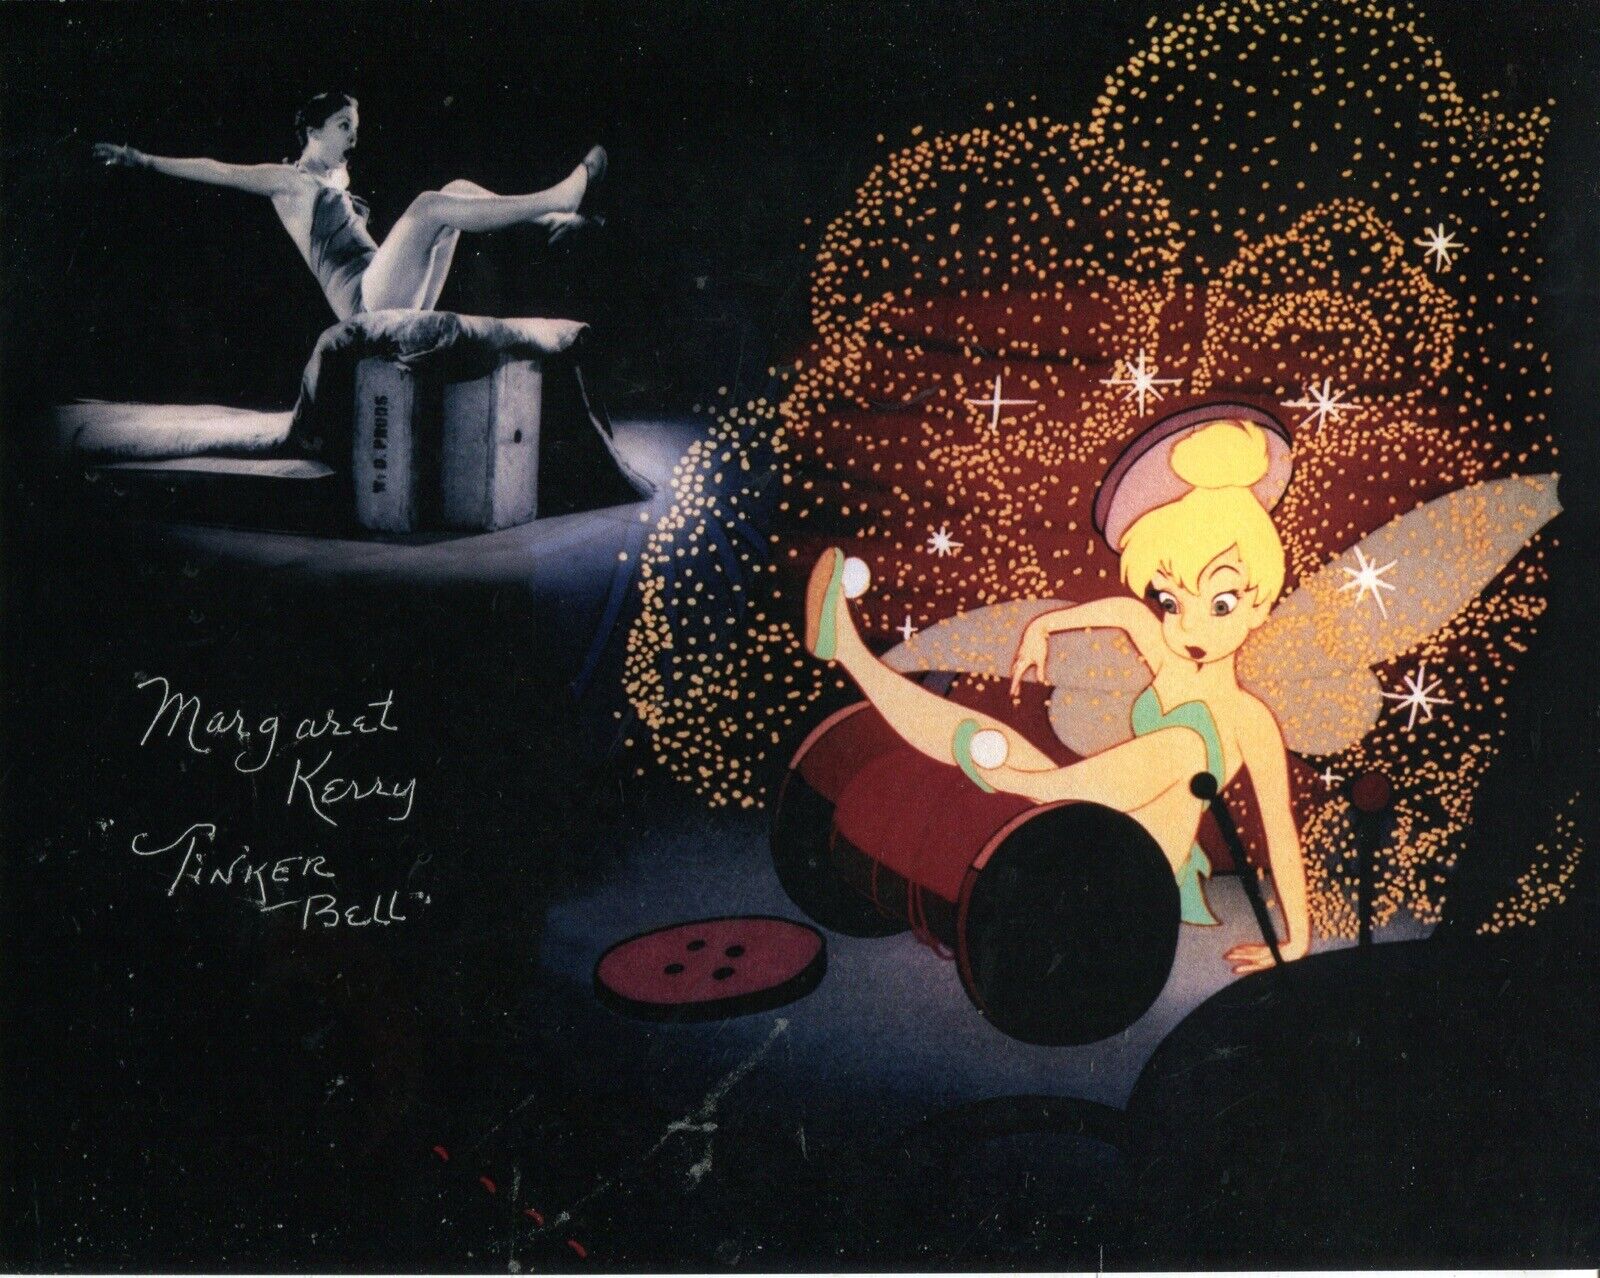 Margaret Kerry as Tinker Bell signed PETER PAN movie Photo Poster painting No6 - UACC DEALER